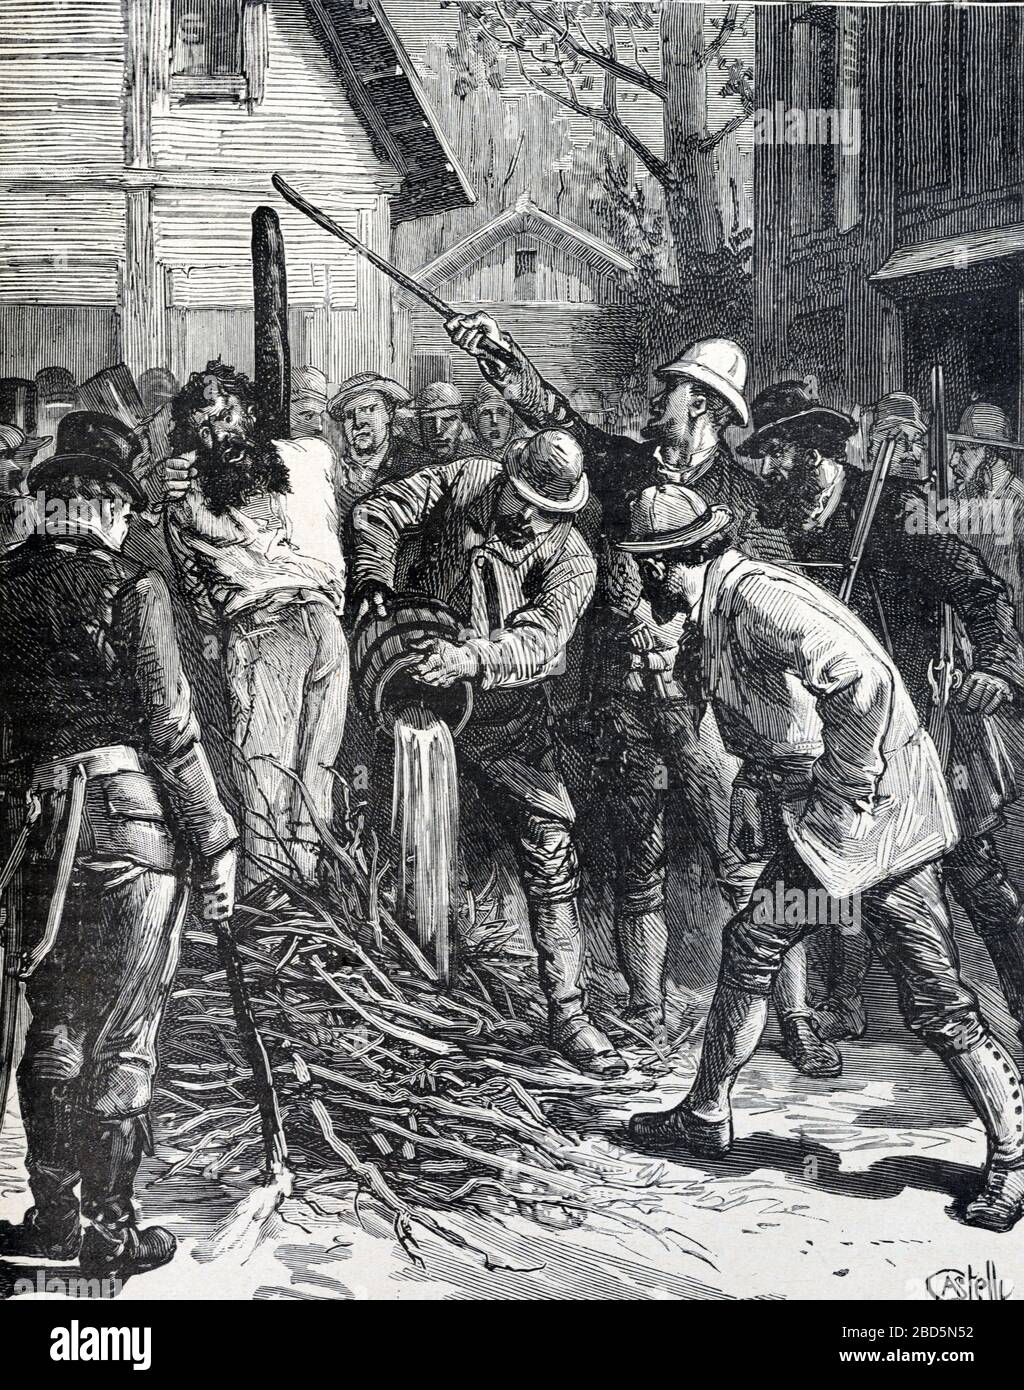 Burning at the Stake, Death by Burning or Man Being Burned at the Stake Georgia United States or USA. Vintage or Old Illustration or Engraving 1882 Stock Photo